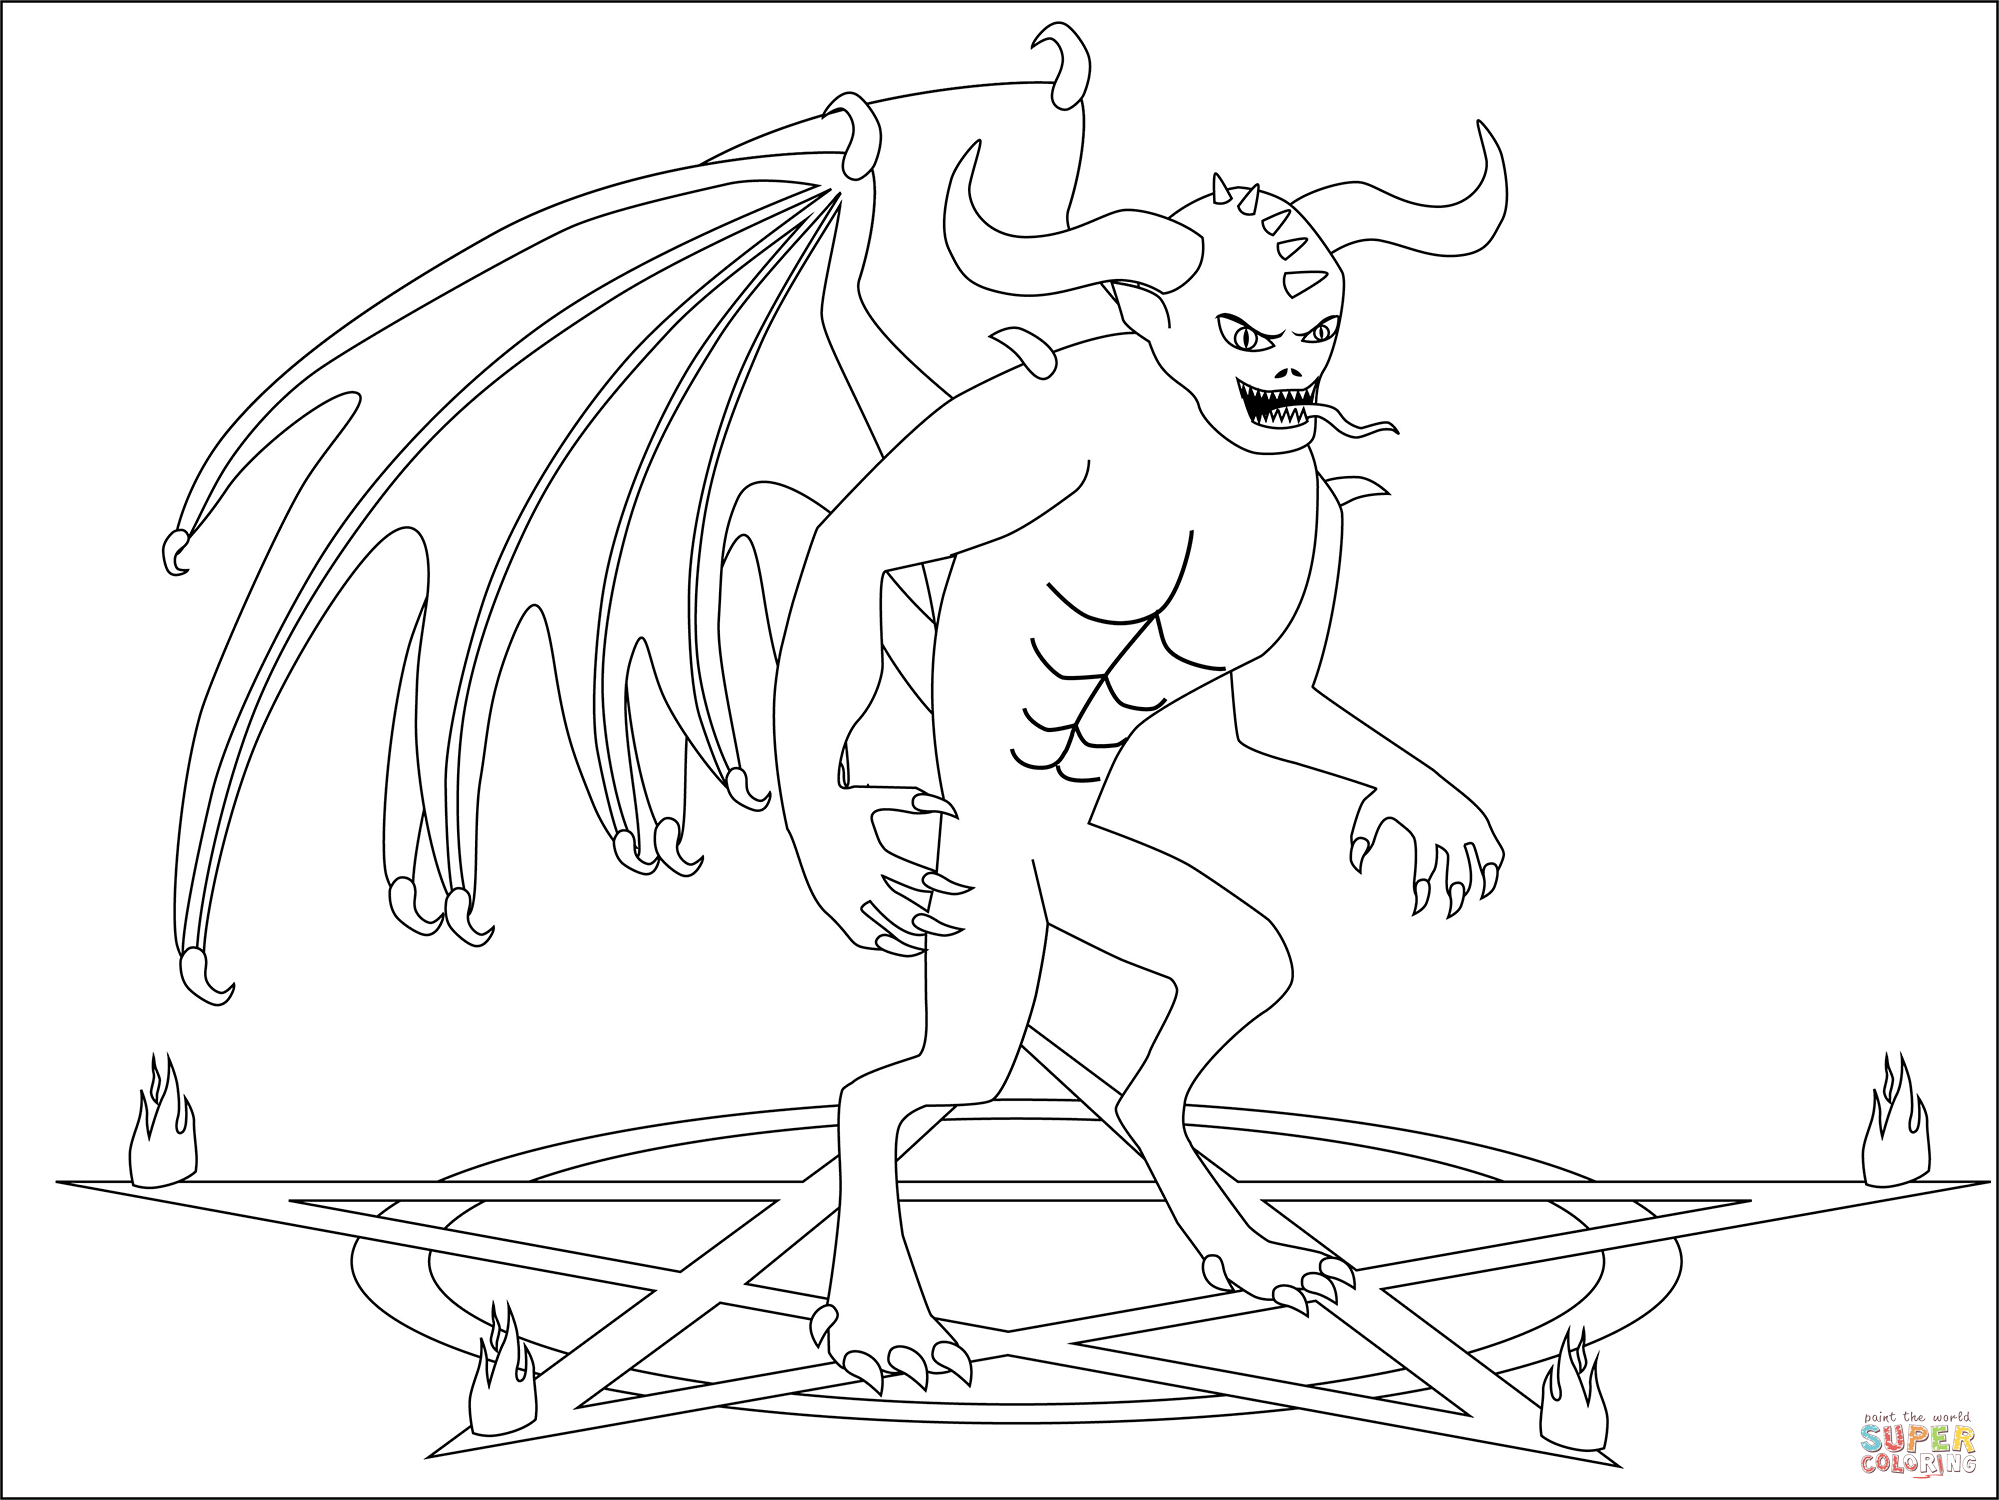 Demon coloring page free printable coloring pages